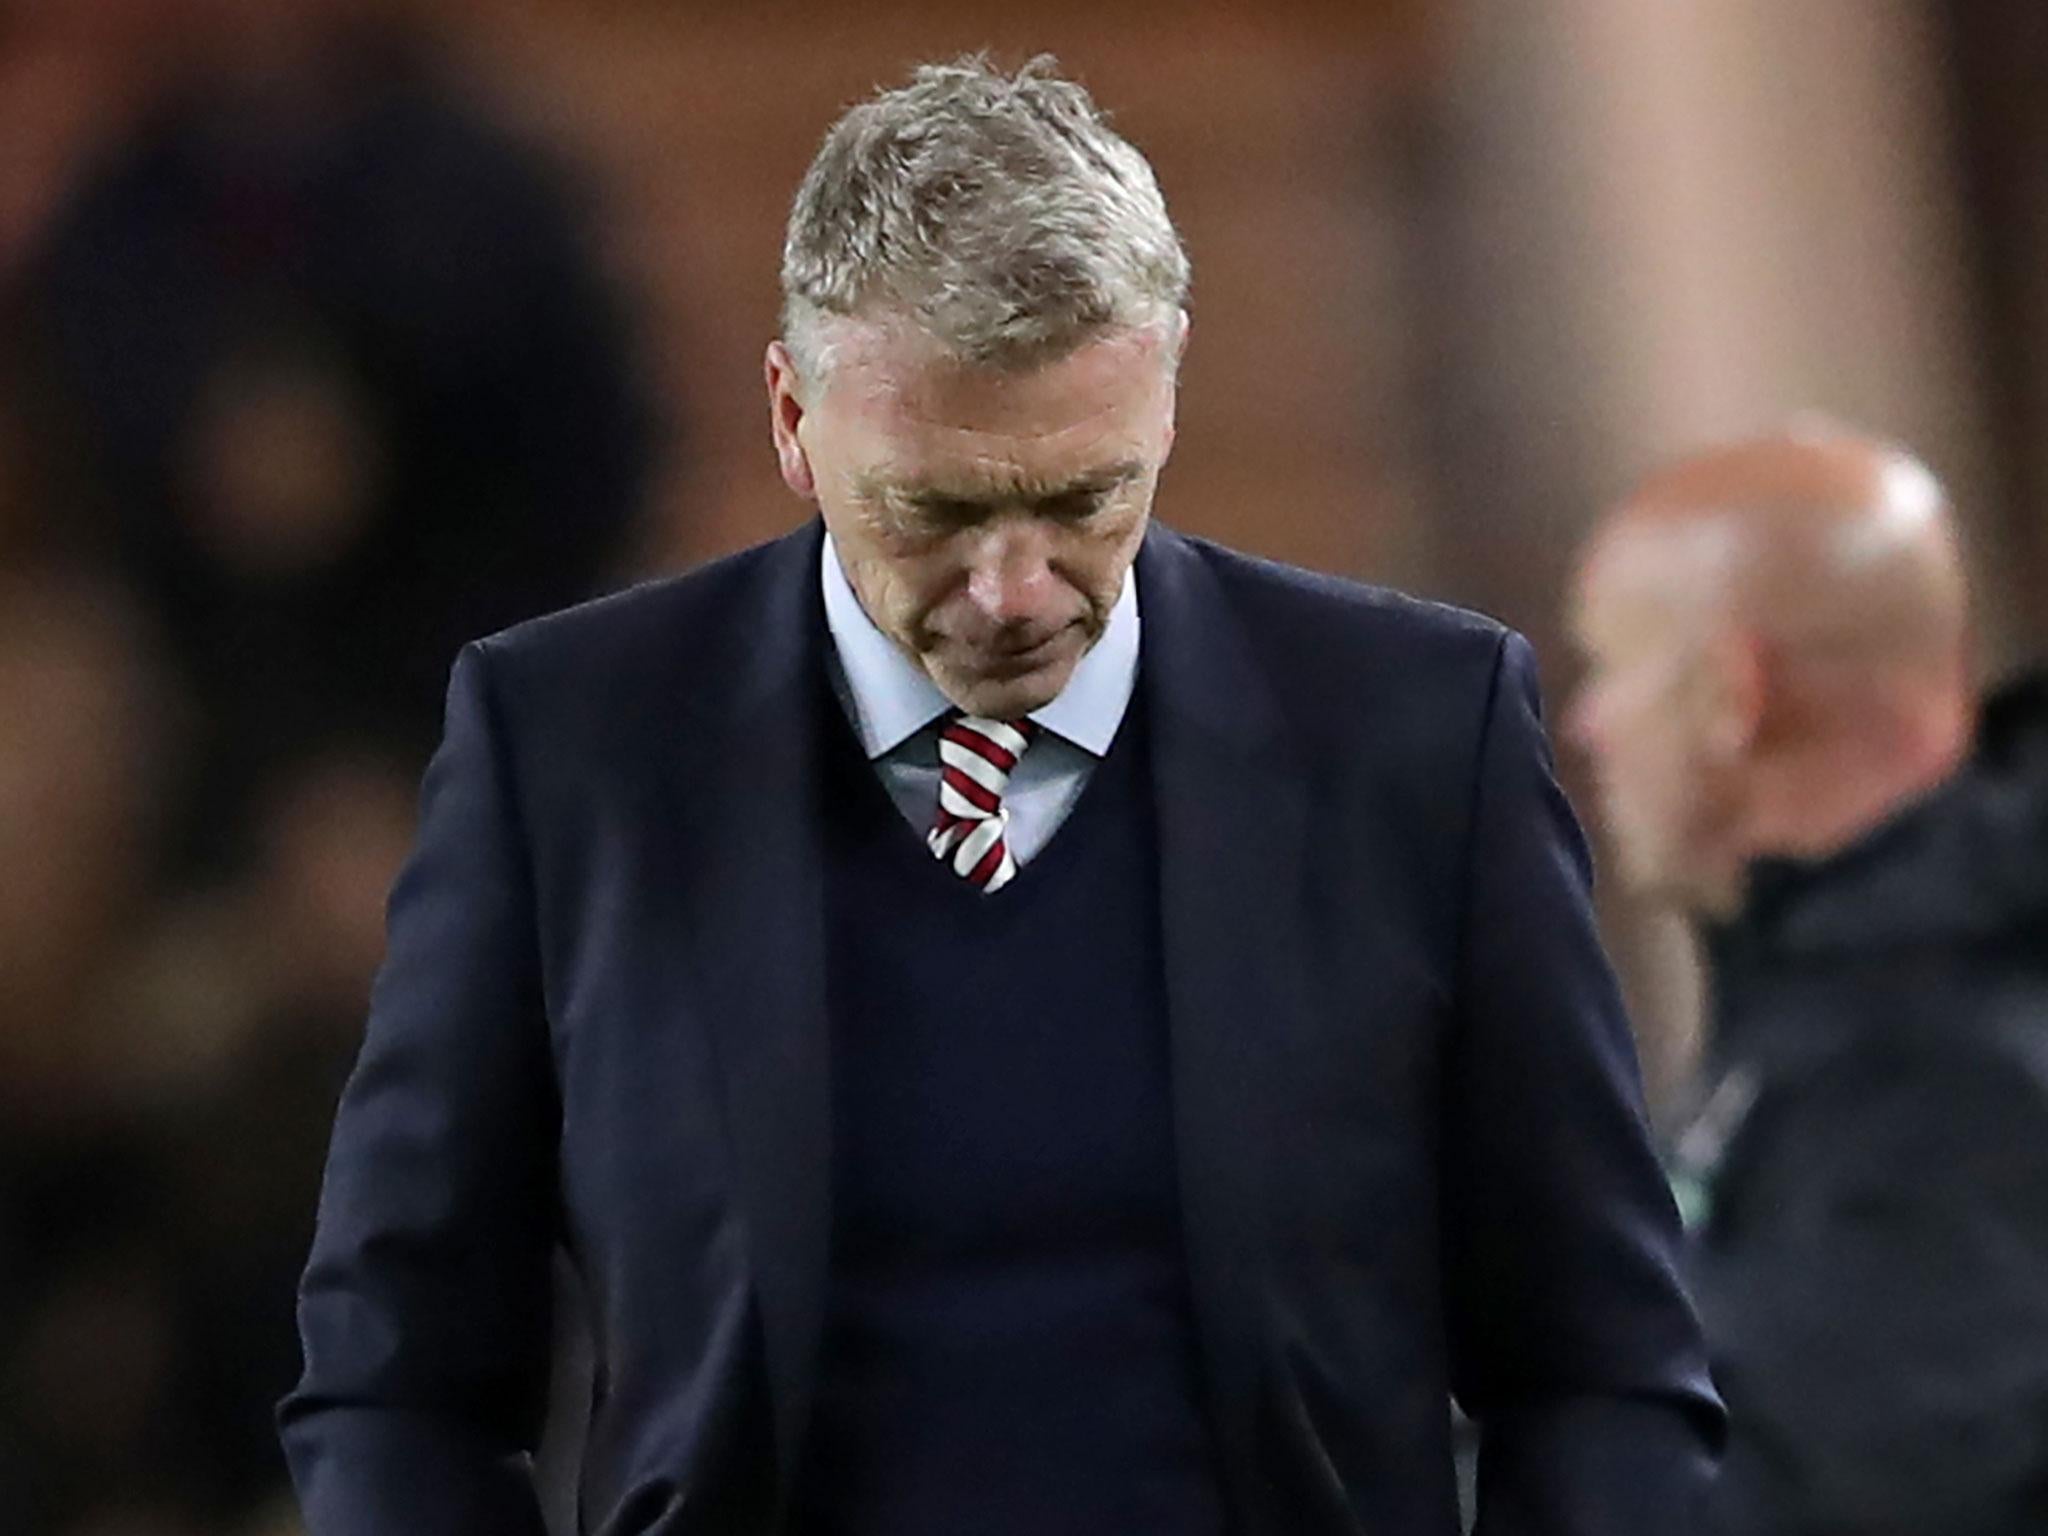 Sunderland look set for the drop after yet another defeat